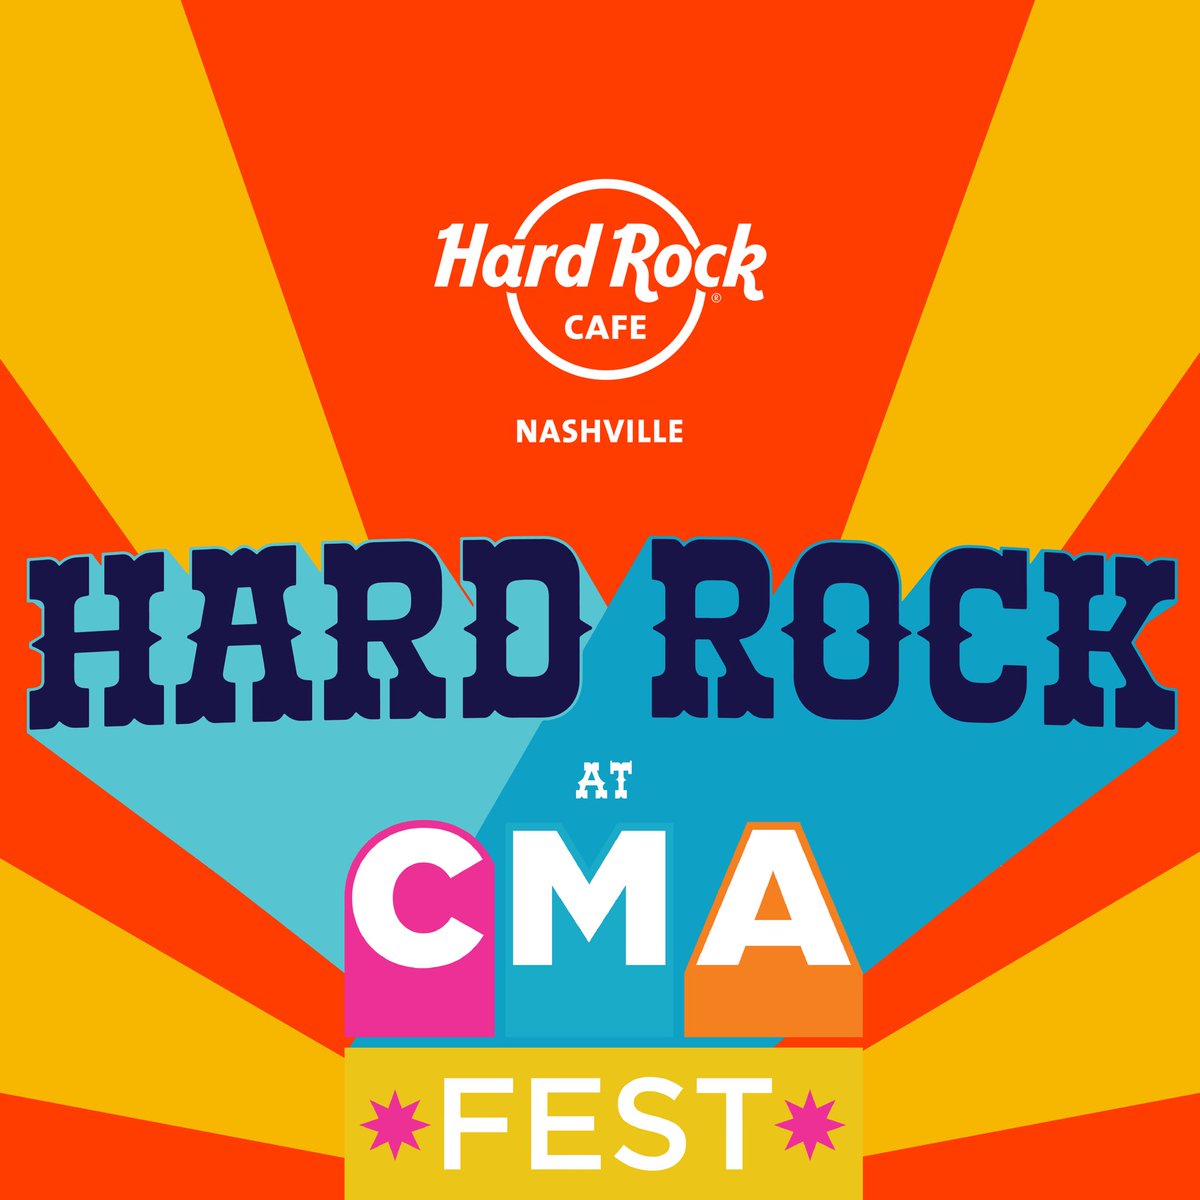 Get ready, CMA fans! The Hard Rock Stage is back for CMA Fest, rockin' Nashville June 6th - 9th with live music ALL DAY & NIGHT! Fuel your fandom with legendary food, drinks and an epic lineup! #CMAfest #HardRockCafe